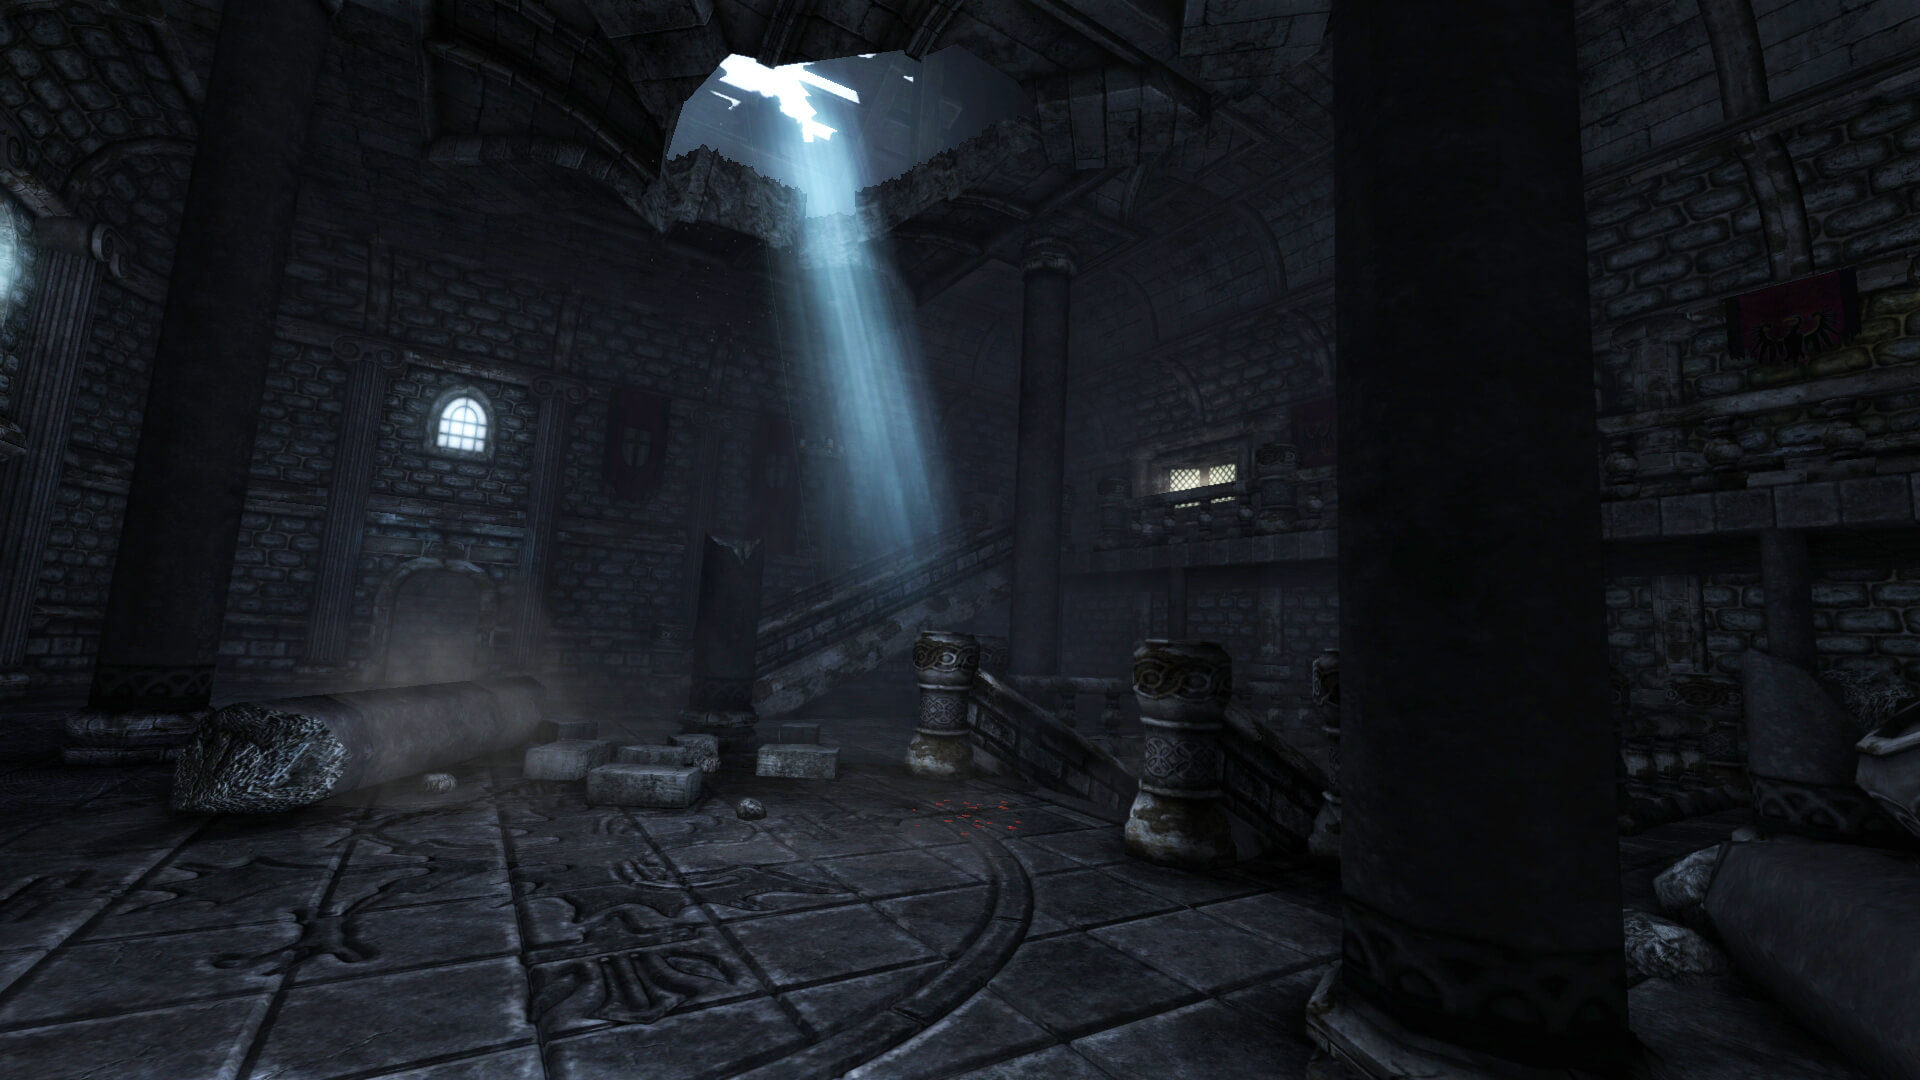 Amnesia: The Dark Descent celebrates 10 years by revisiting